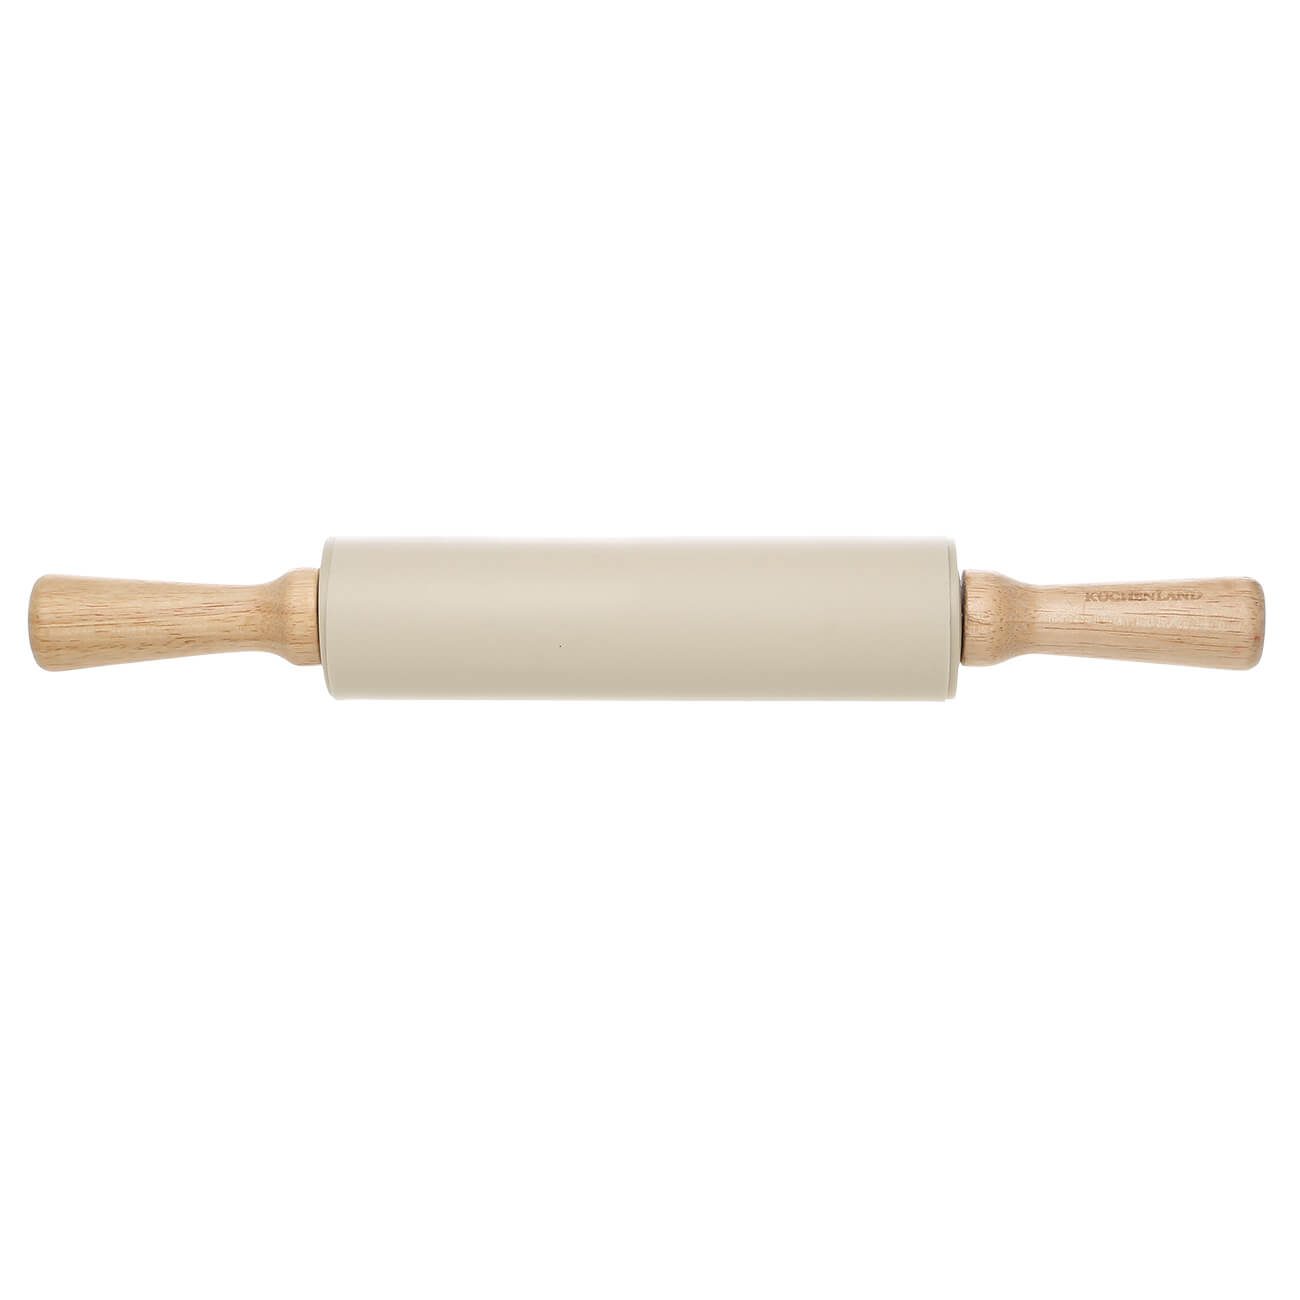 Rolling pin, 38 cm, silicone / wood, beige, Bakery изображение № 1